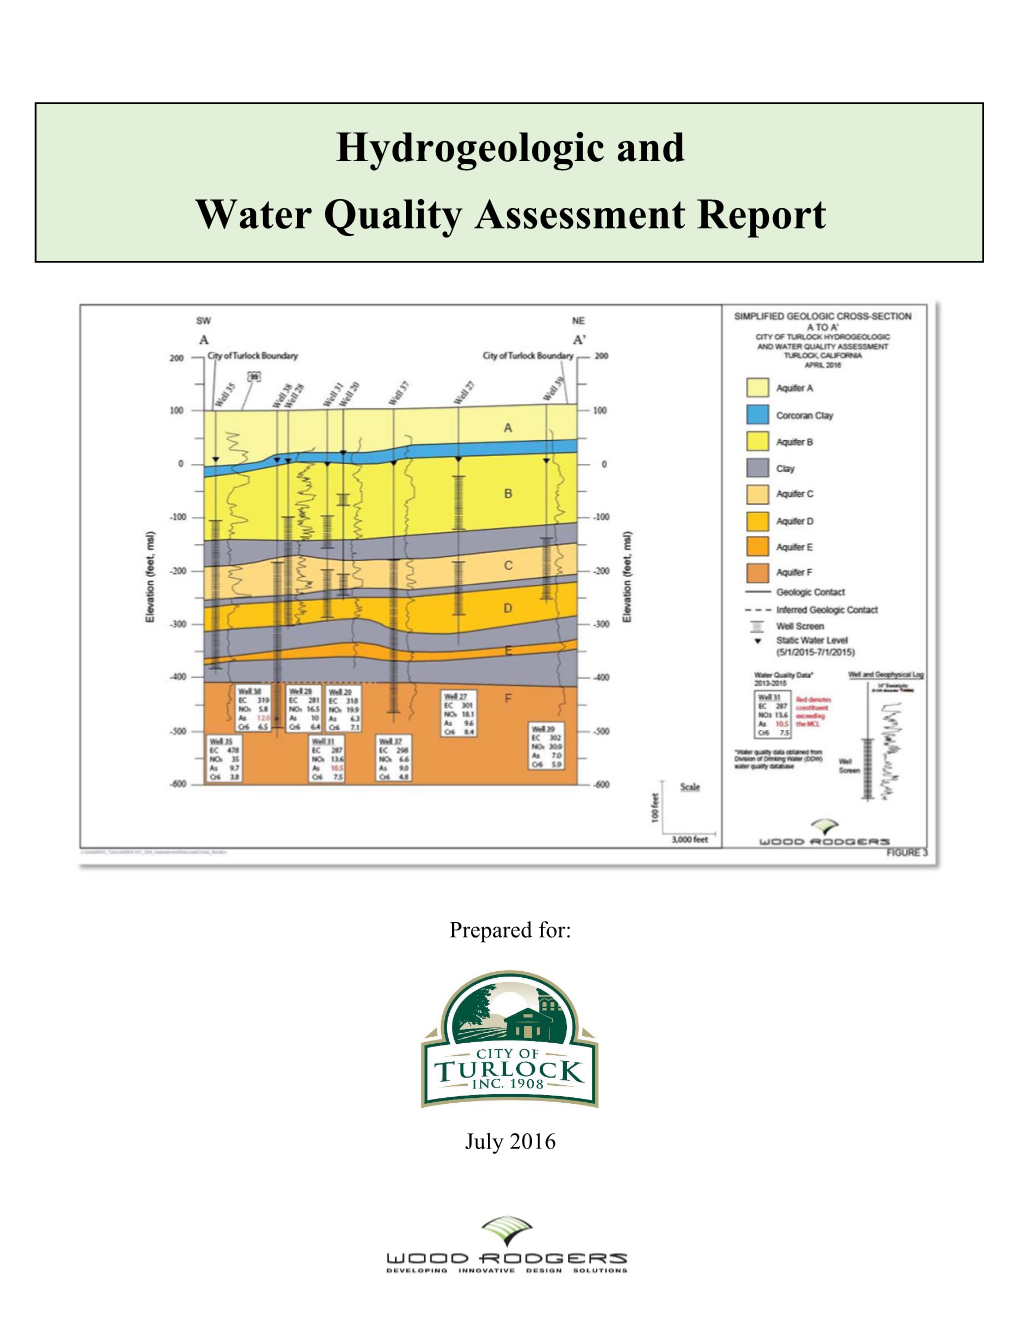 Hydrogeologic and Water Quality Assessment Report